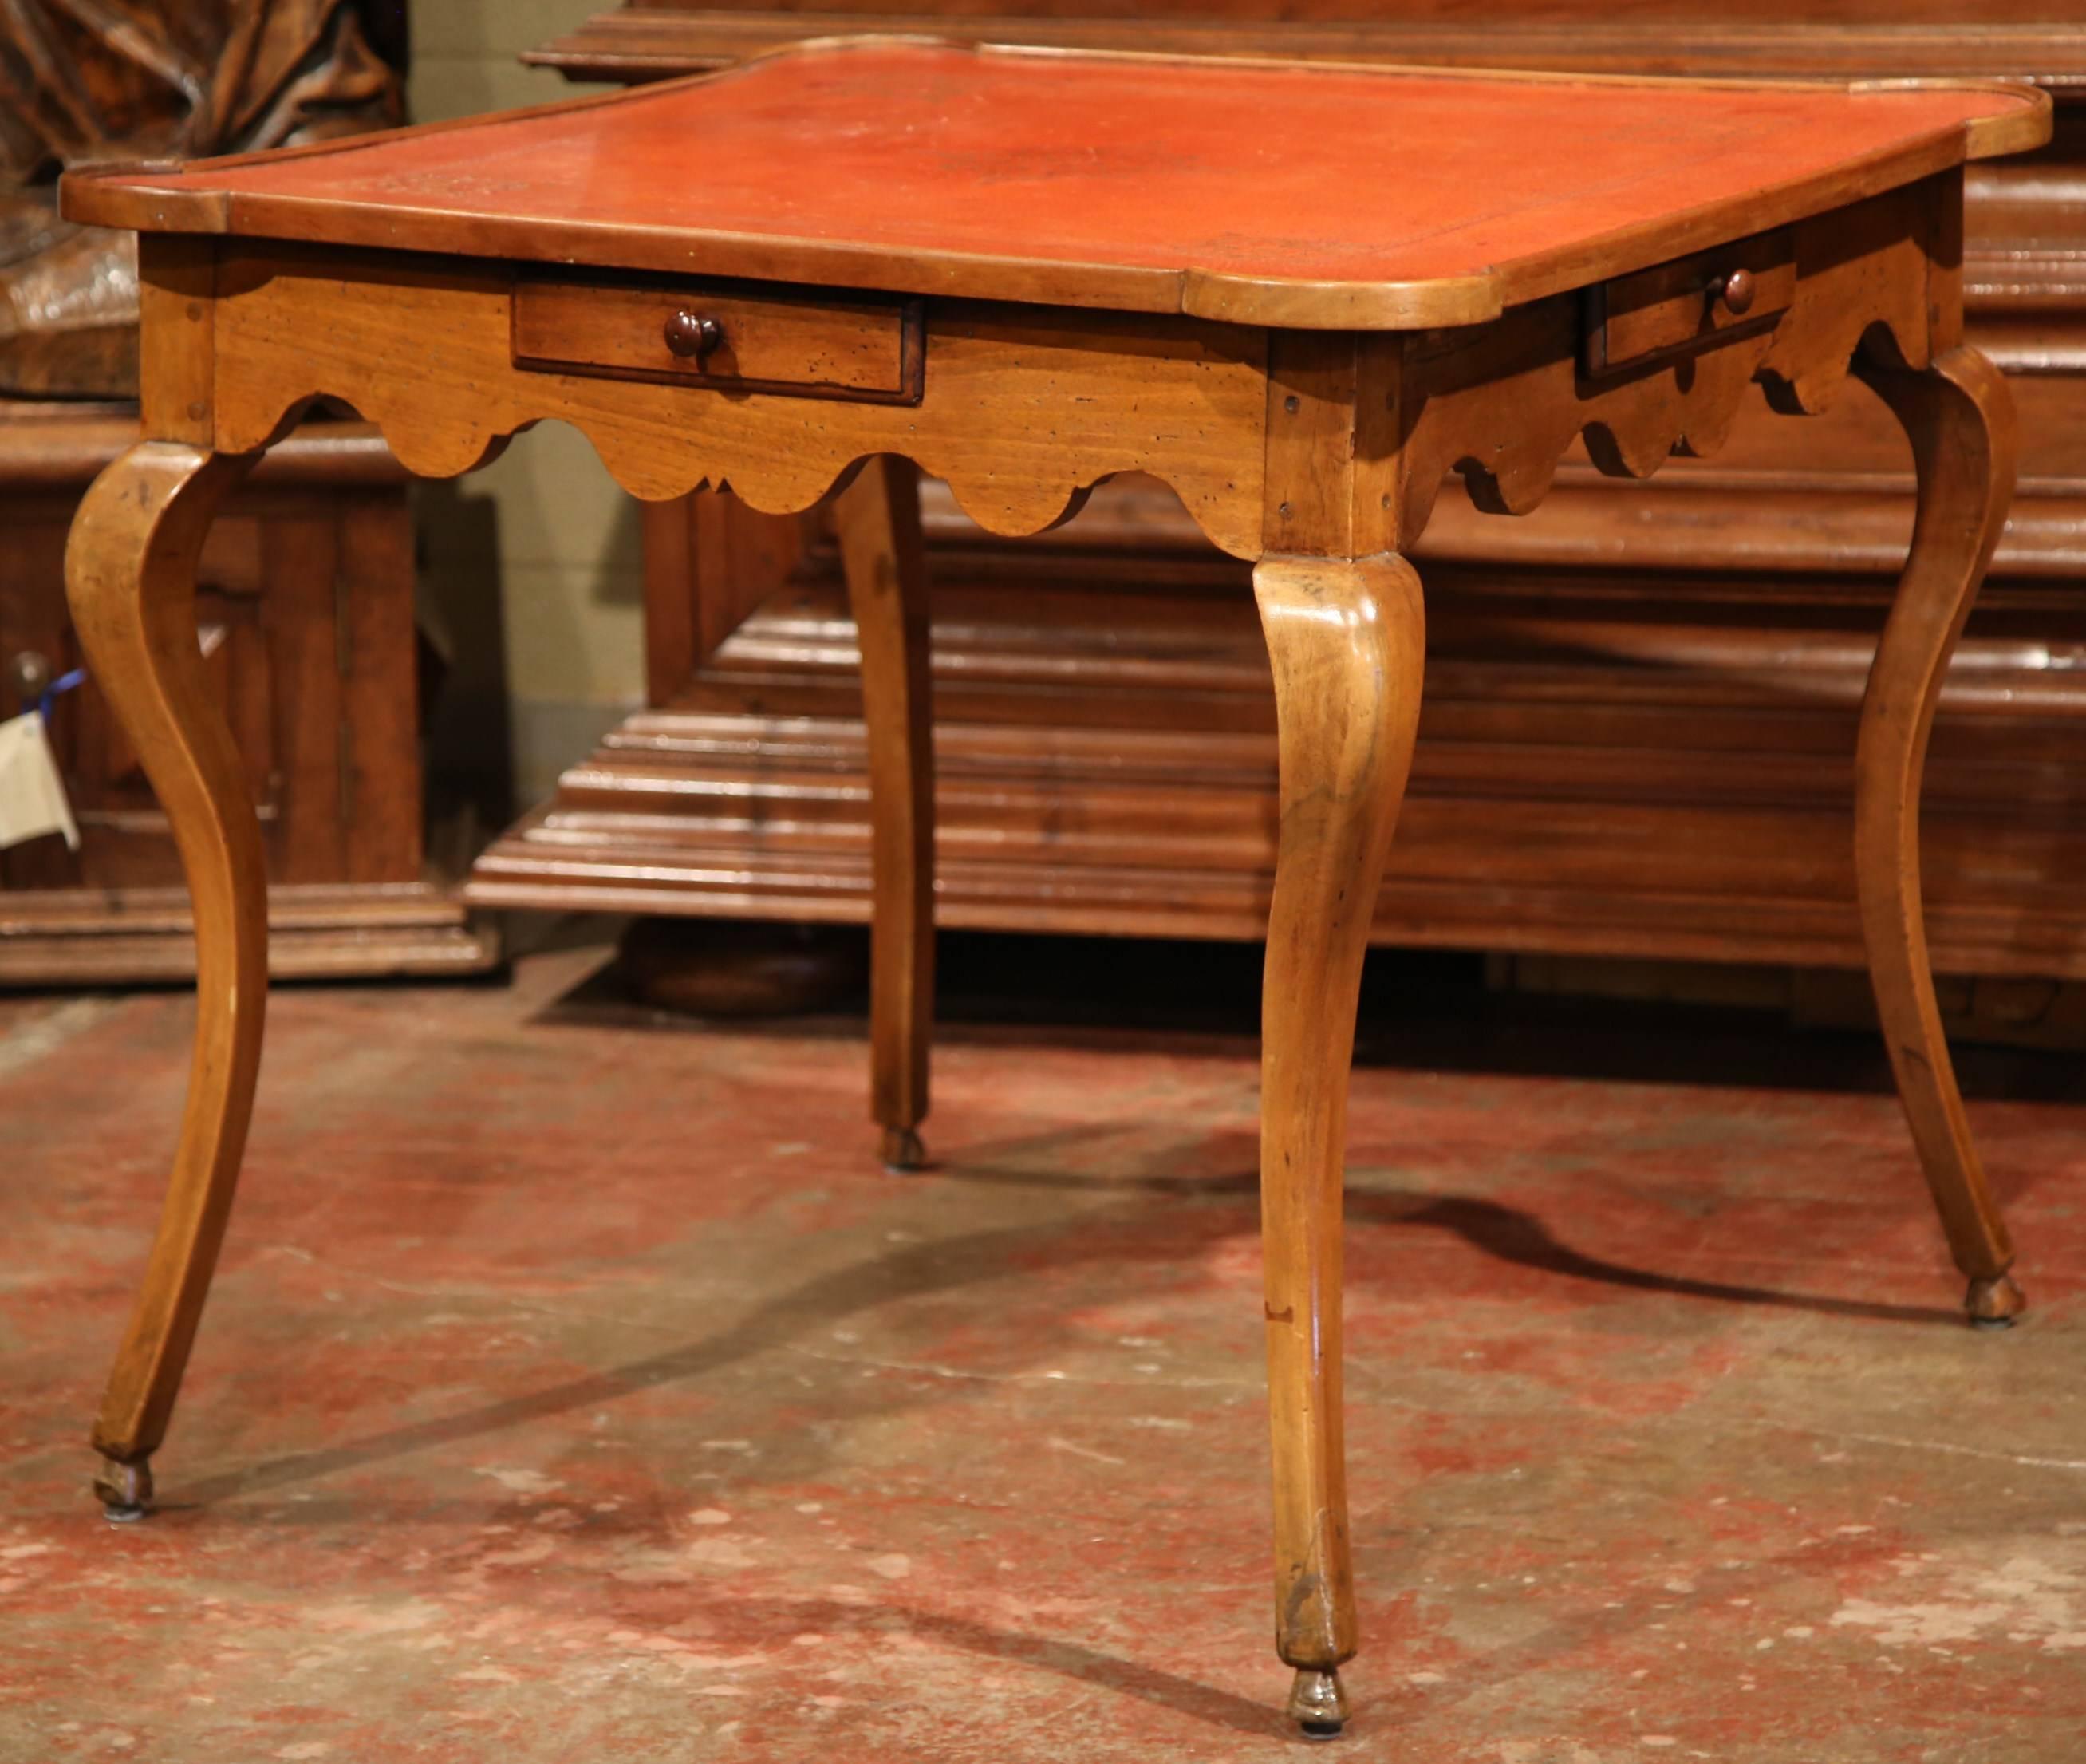 Have your next poker or bridge tournament around this elegant square fruit wood table. Crafted in France, circa 1850, the antique game table has rounded corners, a shaped apron and four cabriole legs with hoof feet. The table has a small drawer on